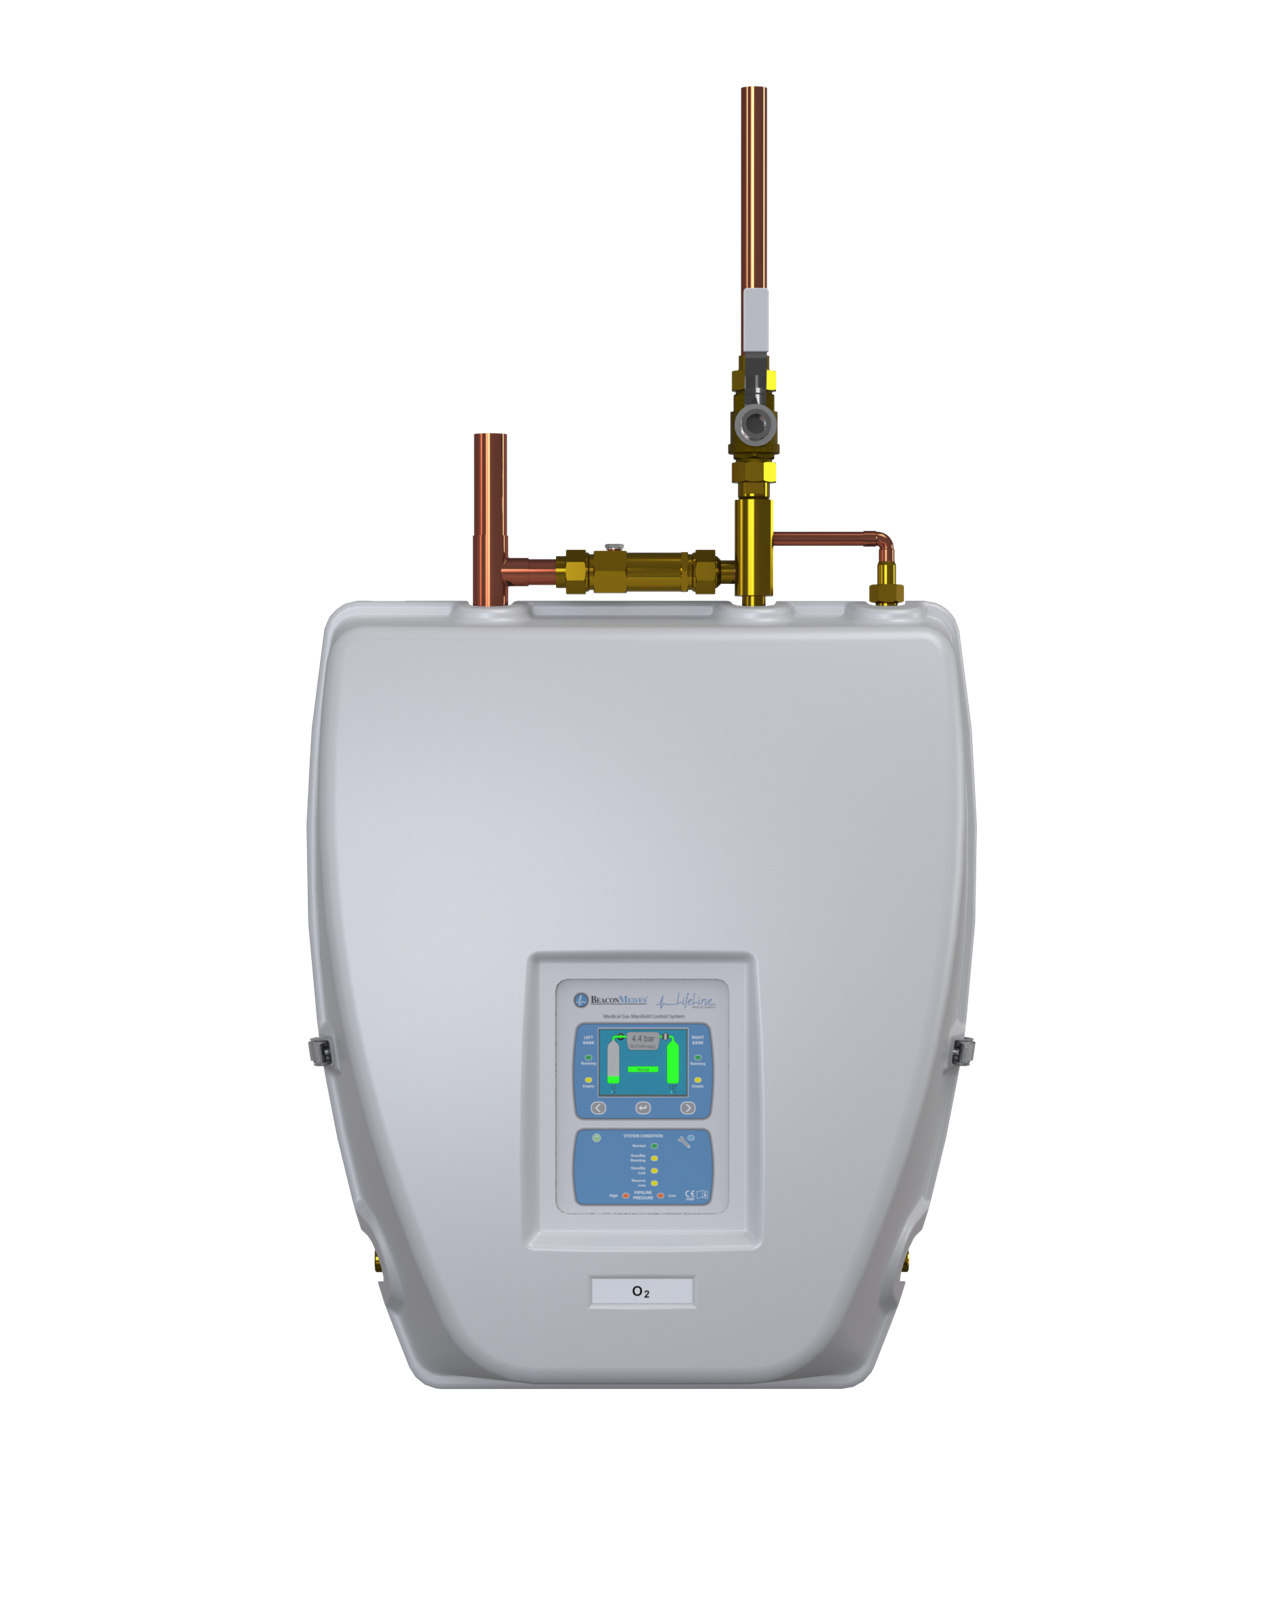 Suppliers of Reliable Medical Gas Supply Systems